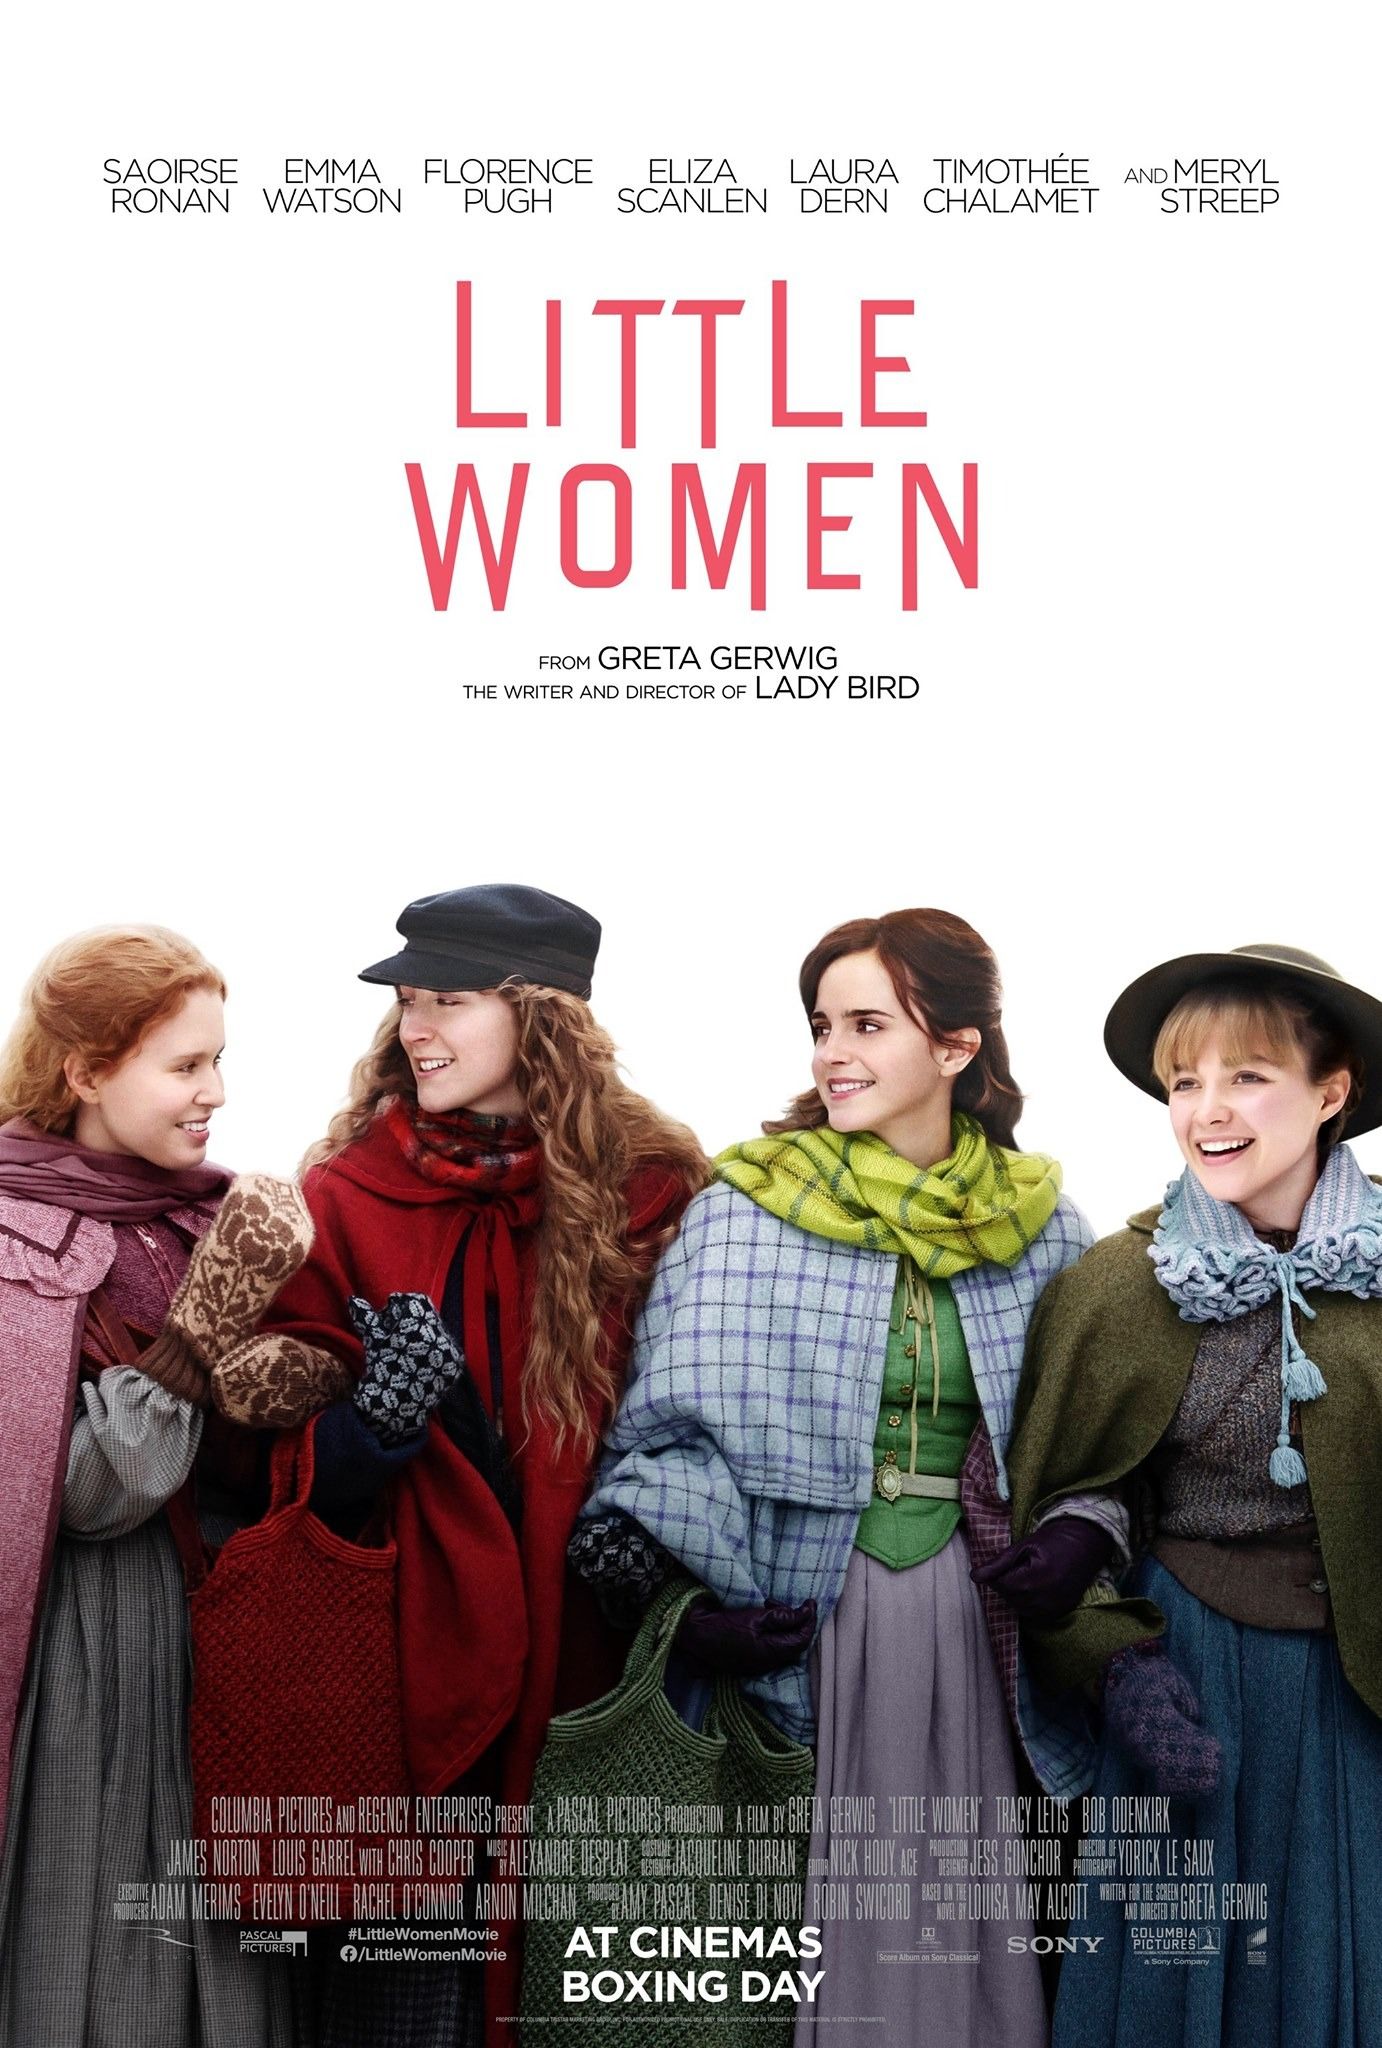 Little Women Trailer: Greta Gerwig Puts Her Spin On the Classic